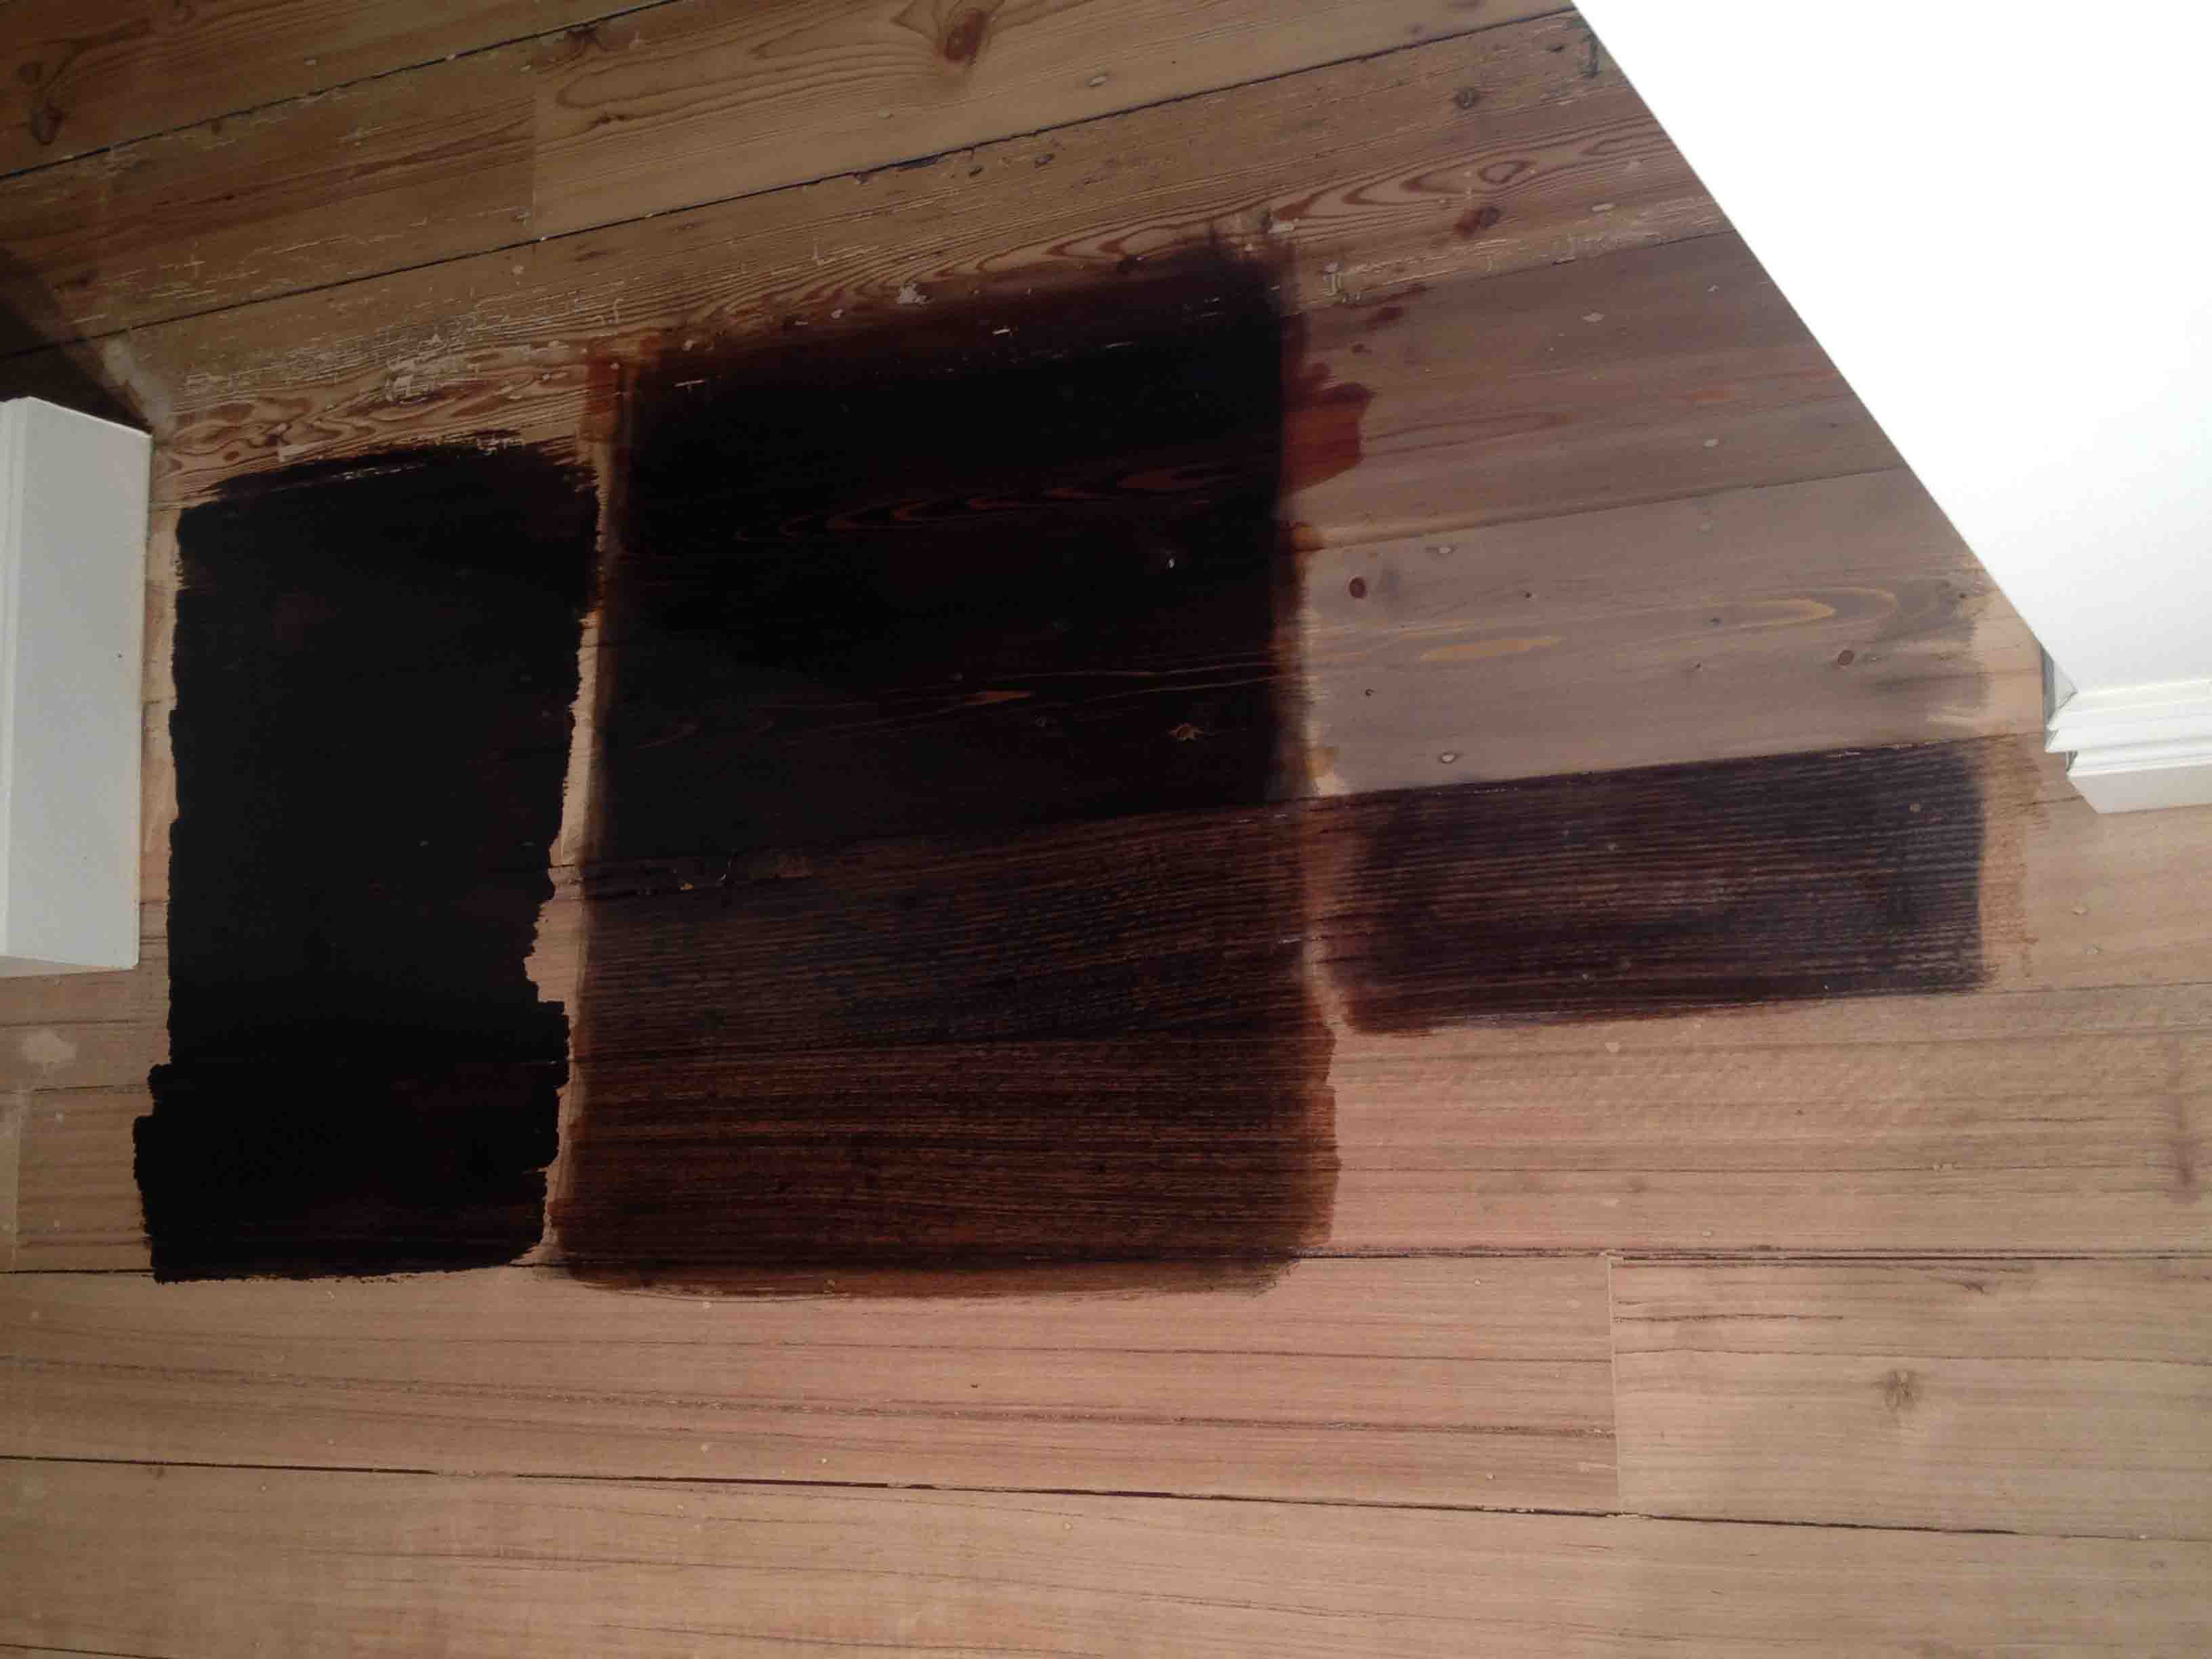 Feast Watson Wood Stain Colour Chart